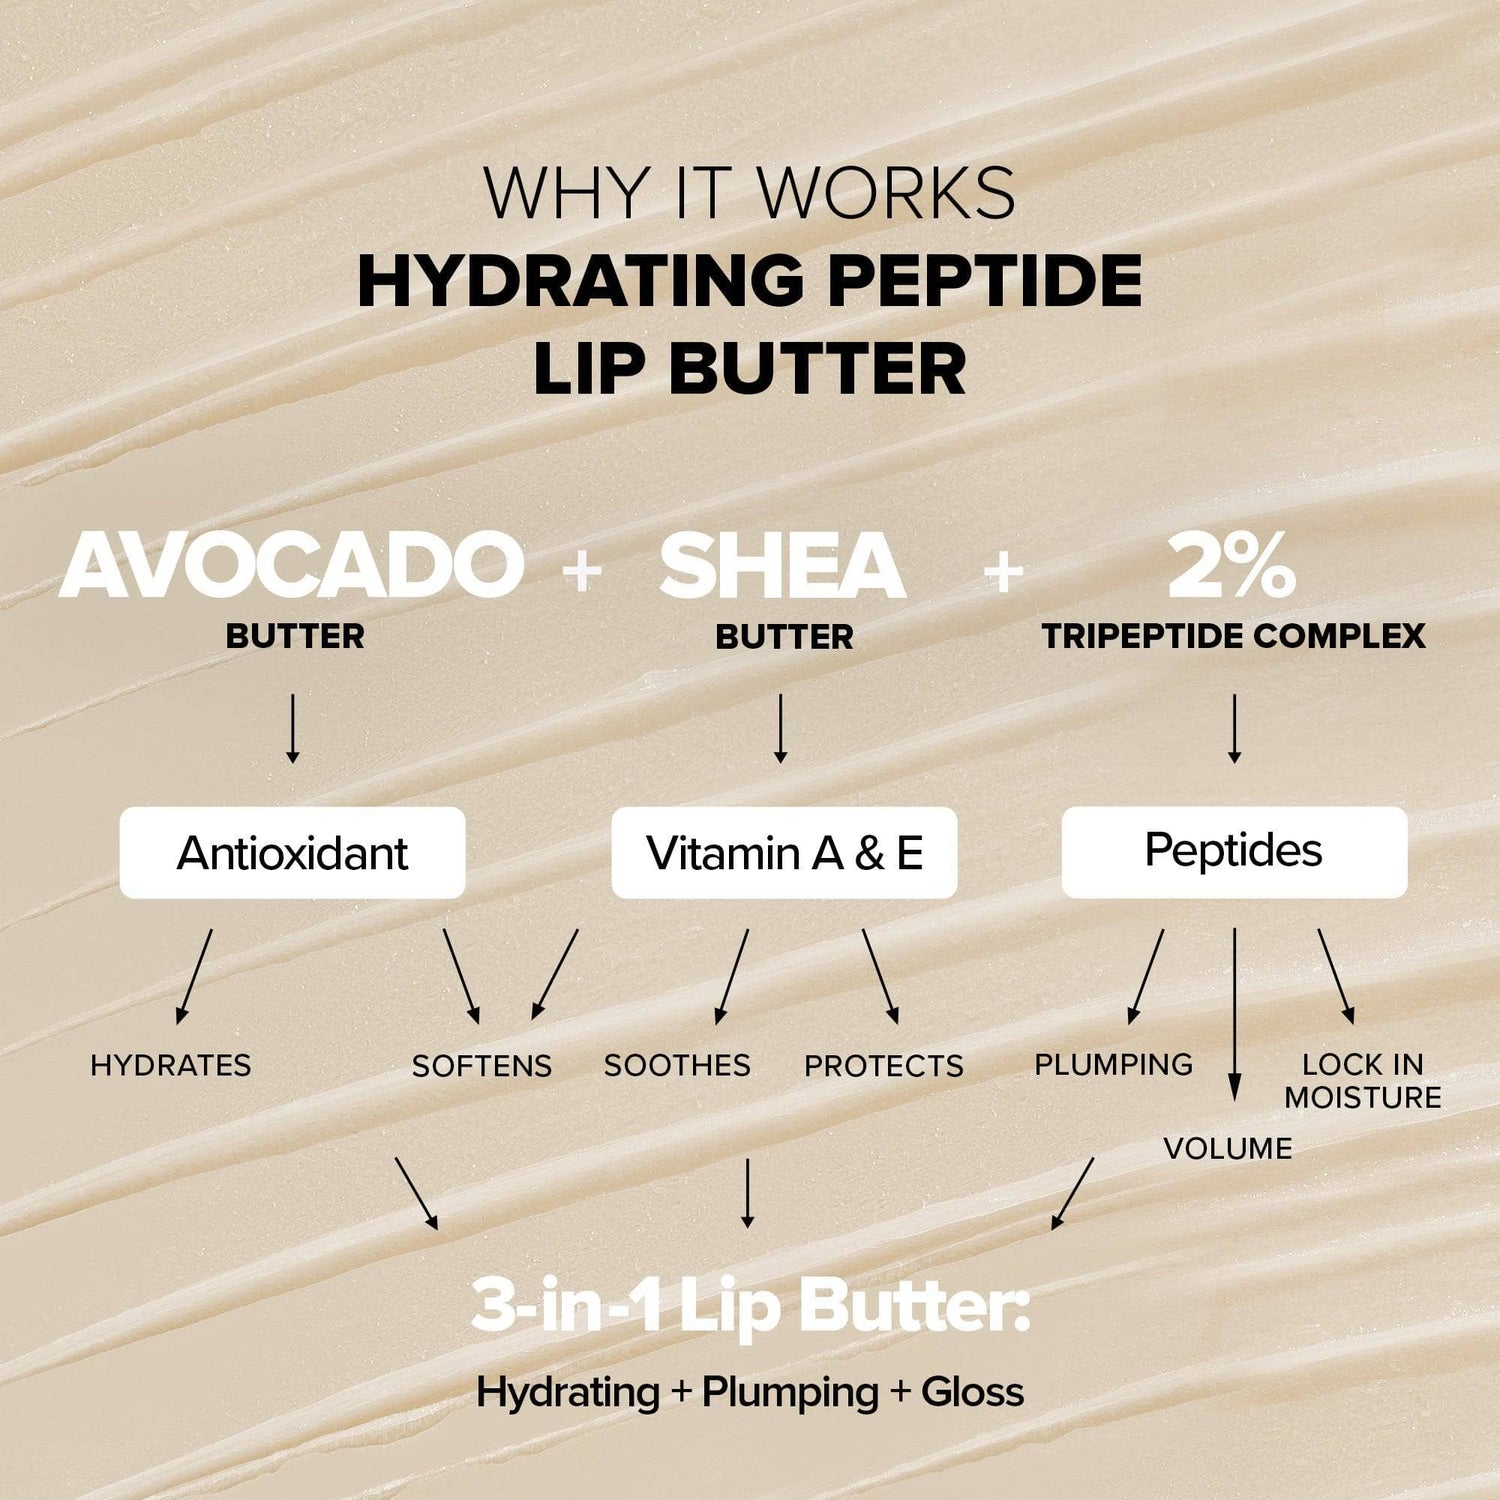 Hydra Peptide Lip Butter, why it works with ingredient details